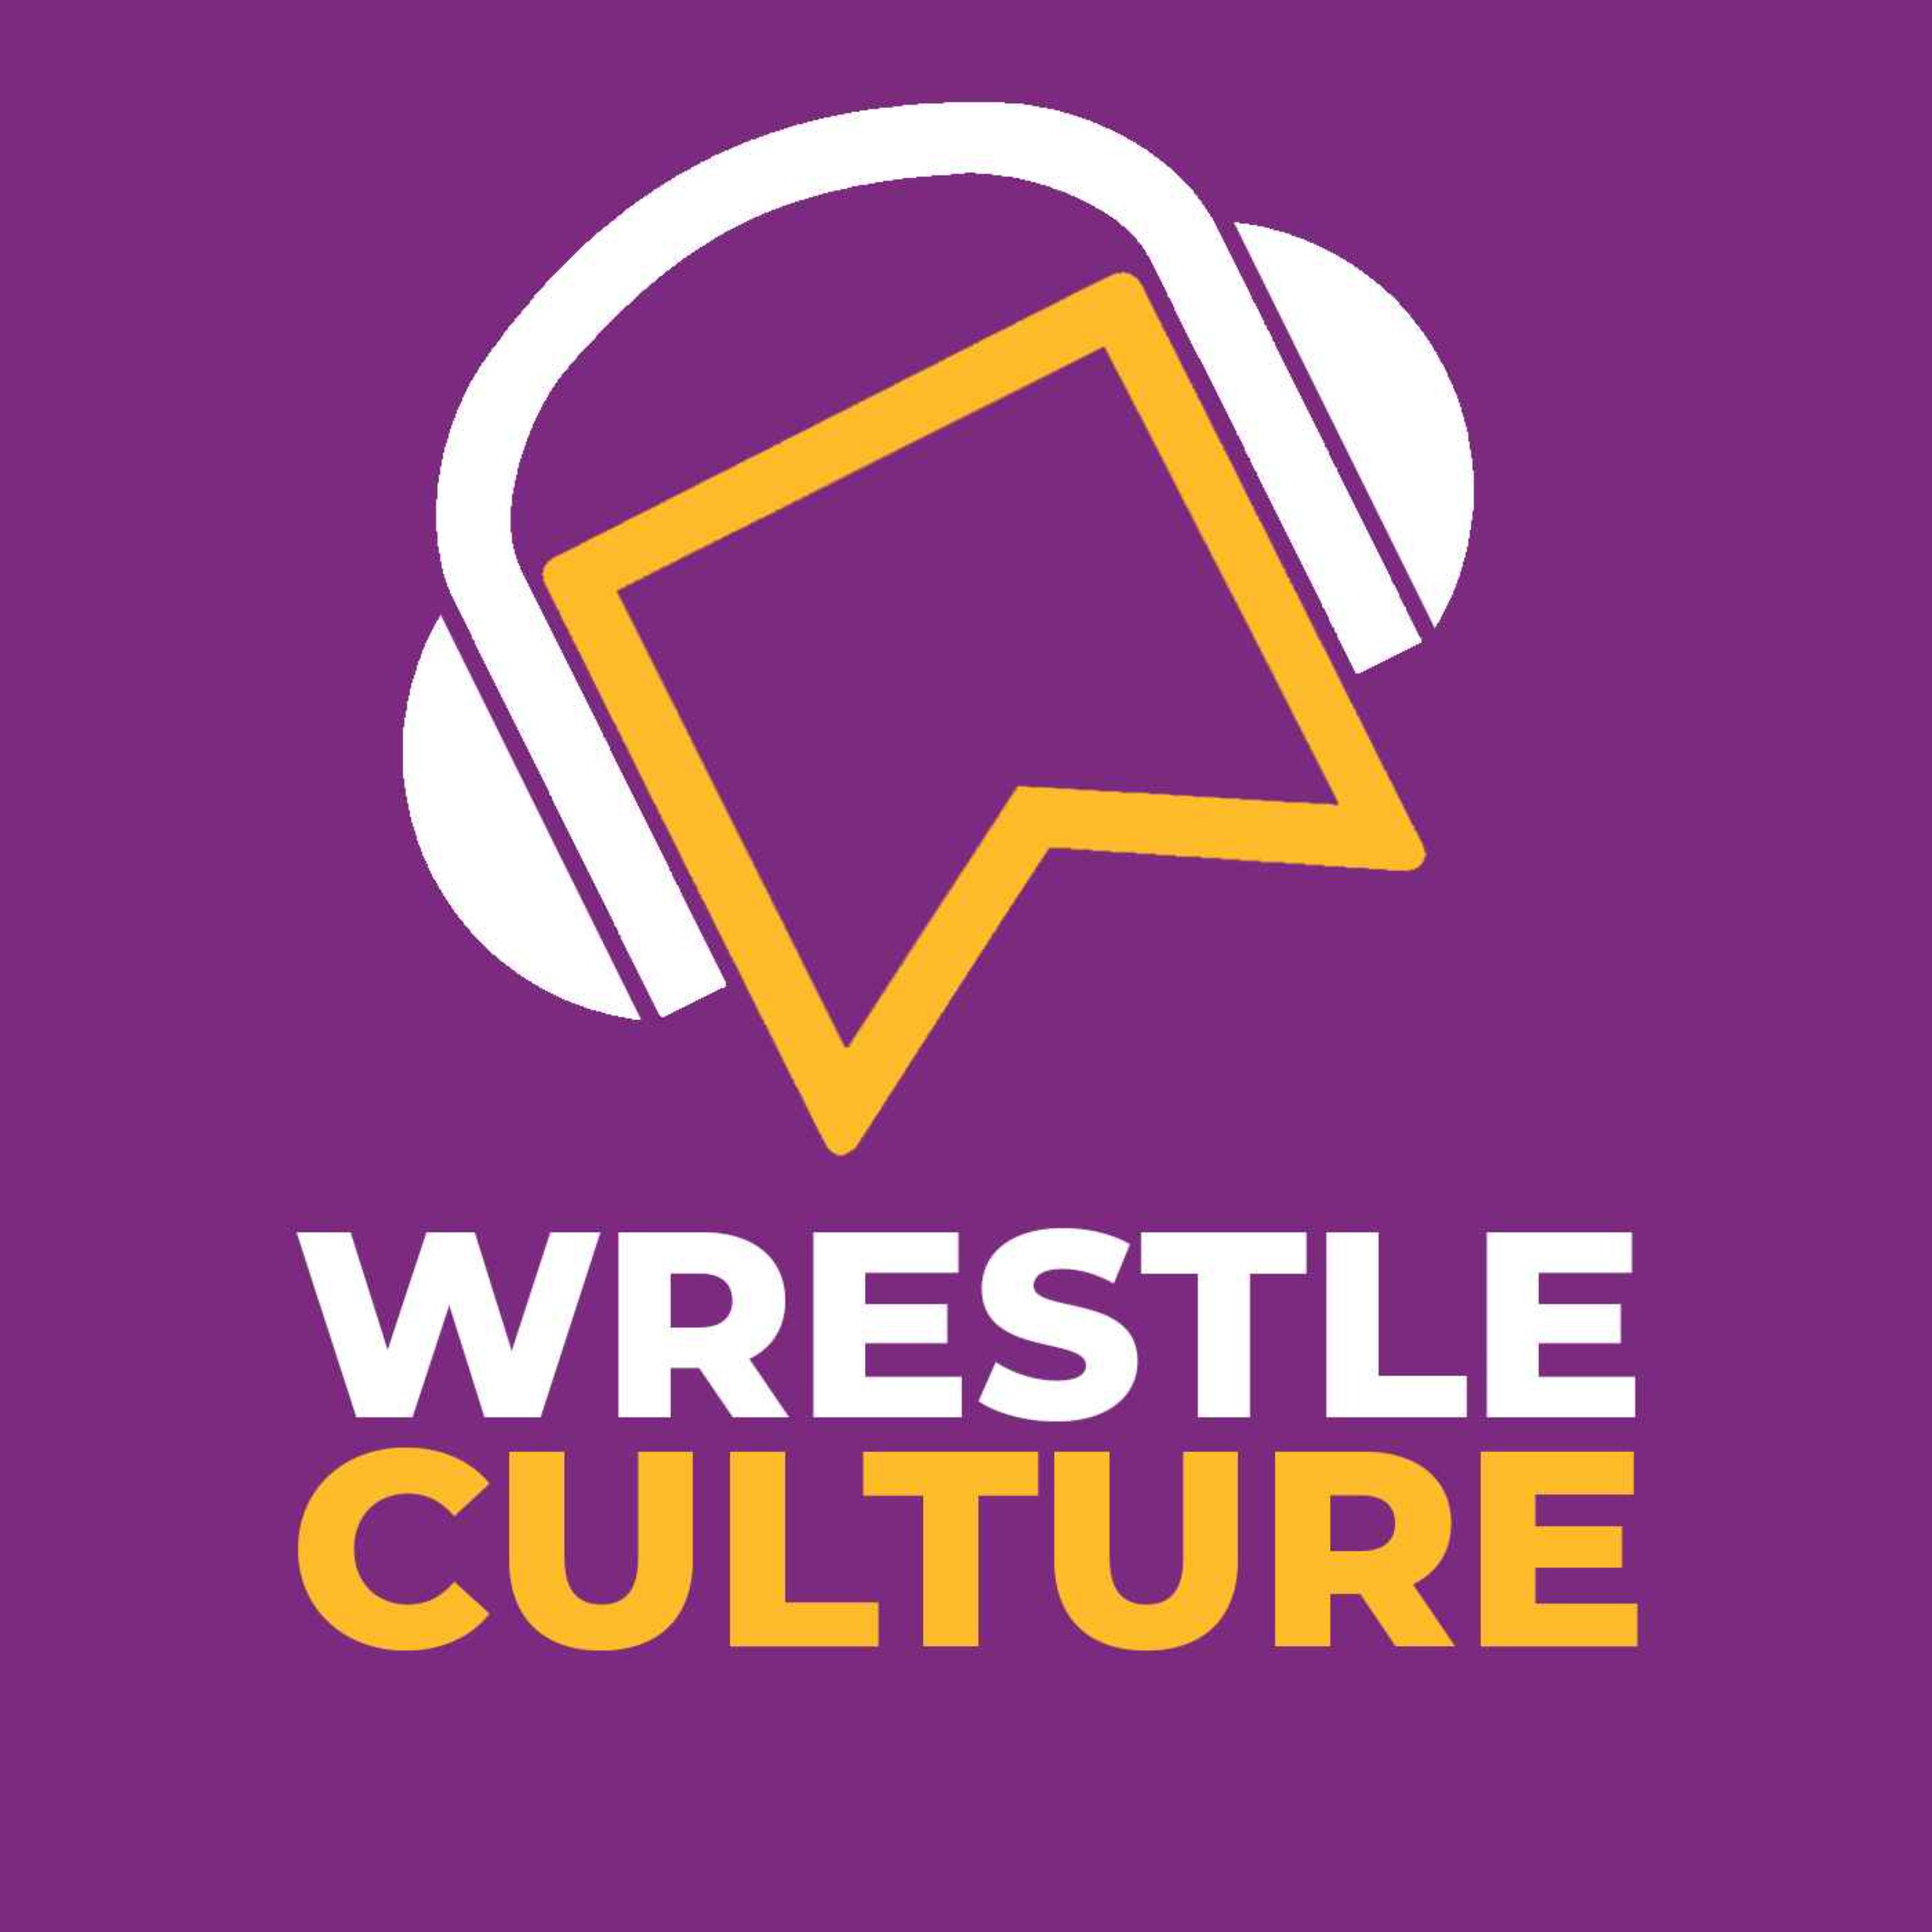 WrestleCulture - BACKLASH PREVIEW! A Surprise DEBUT In France? We Believe In Joe Hendry! The Elite Are Running AEW?!